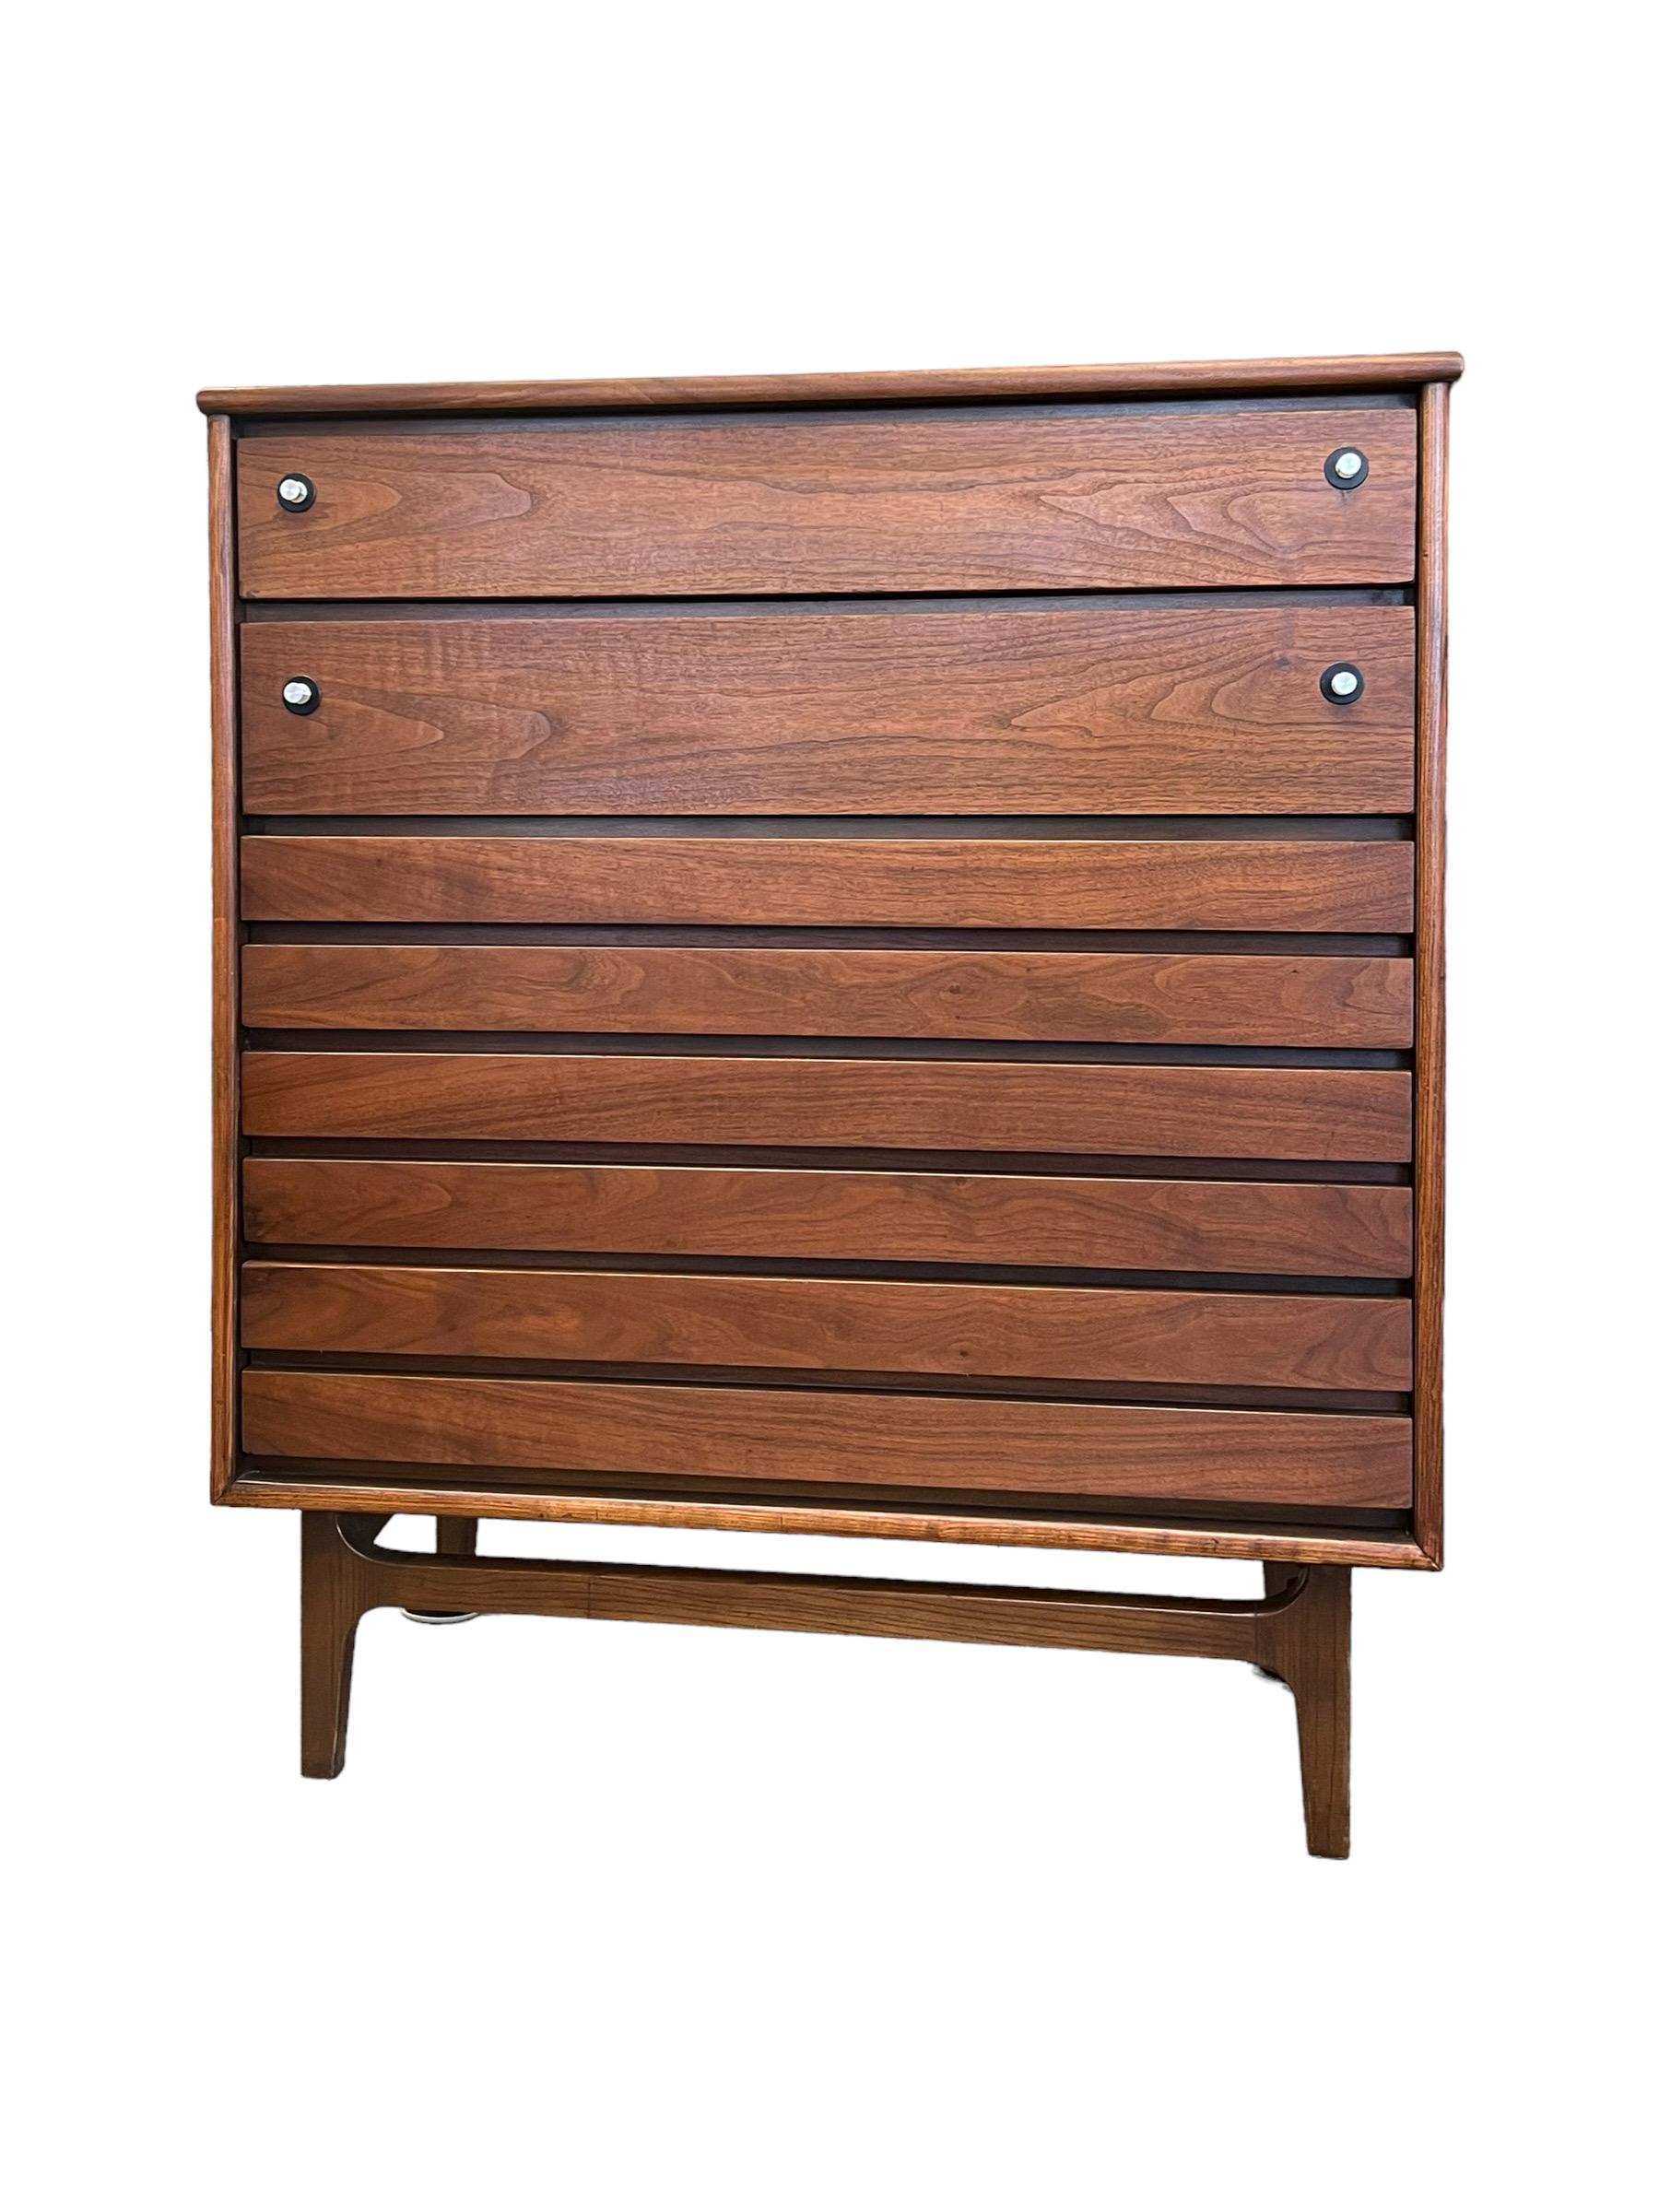 Vintage Mid Century Modern 5 Drawer Dresser by Stanley Dovetail Drawers

Dimensions. 38 W ; 18 D ; 44 H